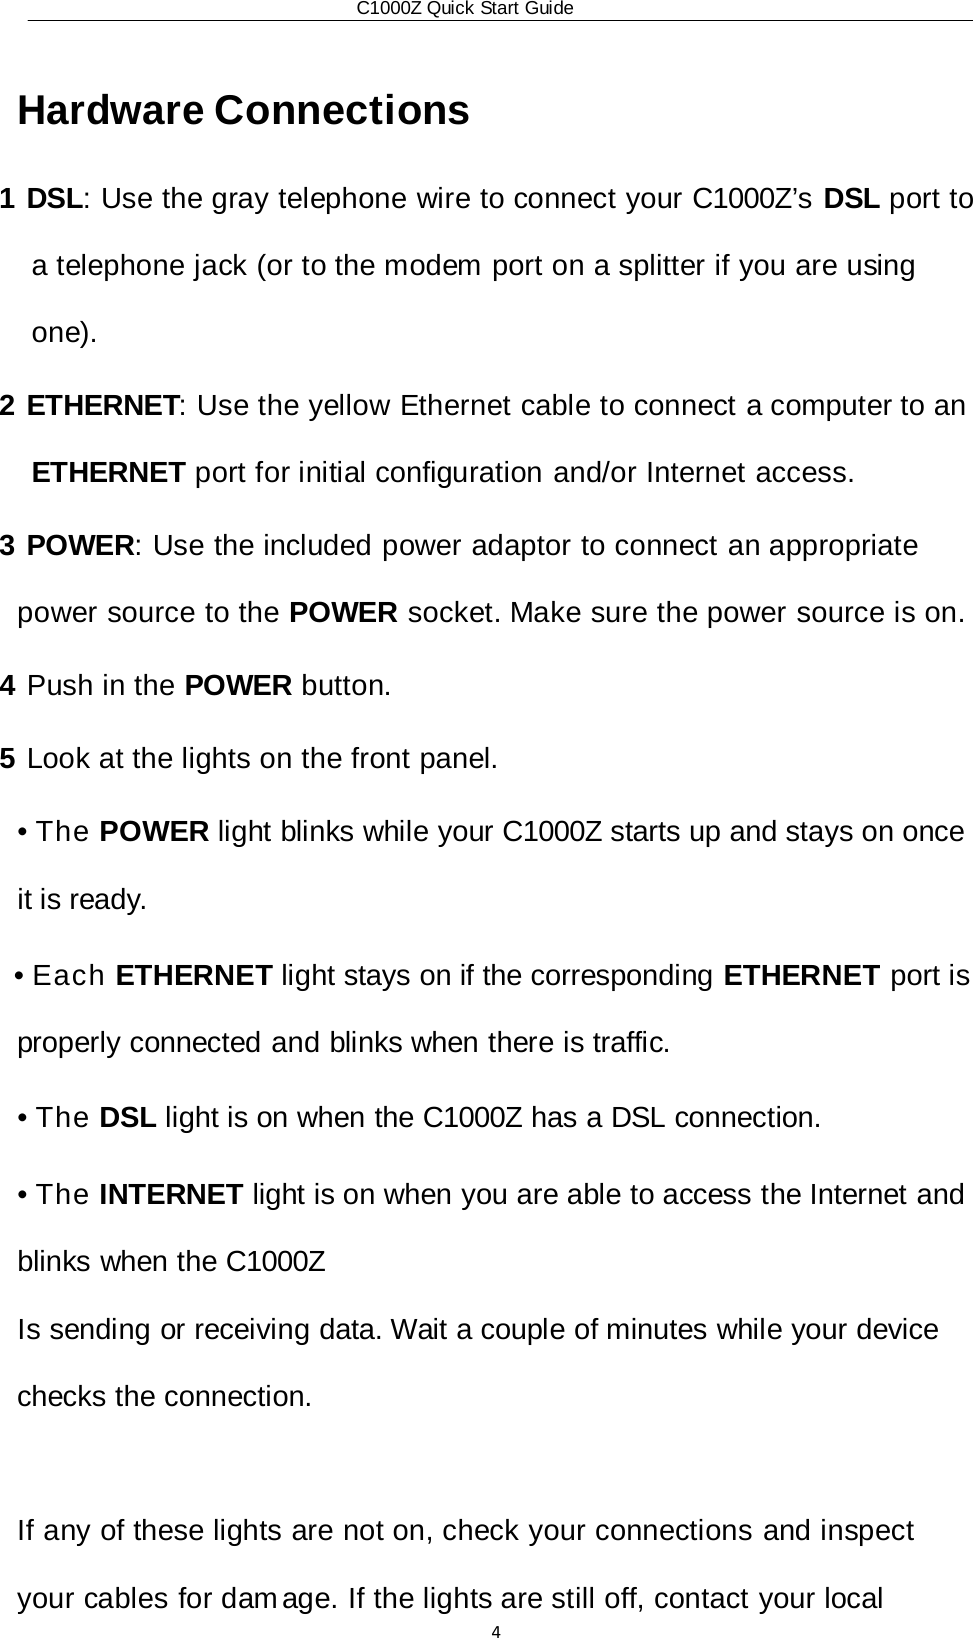 C1000Z Quick Start Guide4 Hardware Connections 1 DSL: Use the gray telephone wire to connect your C1000Z’s DSL port to a telephone jack (or to the modem port on a splitter if you are using one). 2 ETHERNET: Use the yellow Ethernet cable to connect a computer to an ETHERNET port for initial configuration and/or Internet access. 3 POWER: Use the included power adaptor to connect an appropriate power source to the POWER socket. Make sure the power source is on. 4 Push in the POWER button. 5 Look at the lights on the front panel. • The POWER light blinks while your C1000Z starts up and stays on once it is ready. • Each ETHERNET light stays on if the corresponding ETHERNET port is properly connected and blinks when there is traffic. • The DSL light is on when the C1000Z has a DSL connection. • The INTERNET light is on when you are able to access the Internet and blinks when the C1000Z Is sending or receiving data. Wait a couple of minutes while your device checks the connection.  If any of these lights are not on, check your connections and inspect your cables for dam age. If the lights are still off, contact your local 